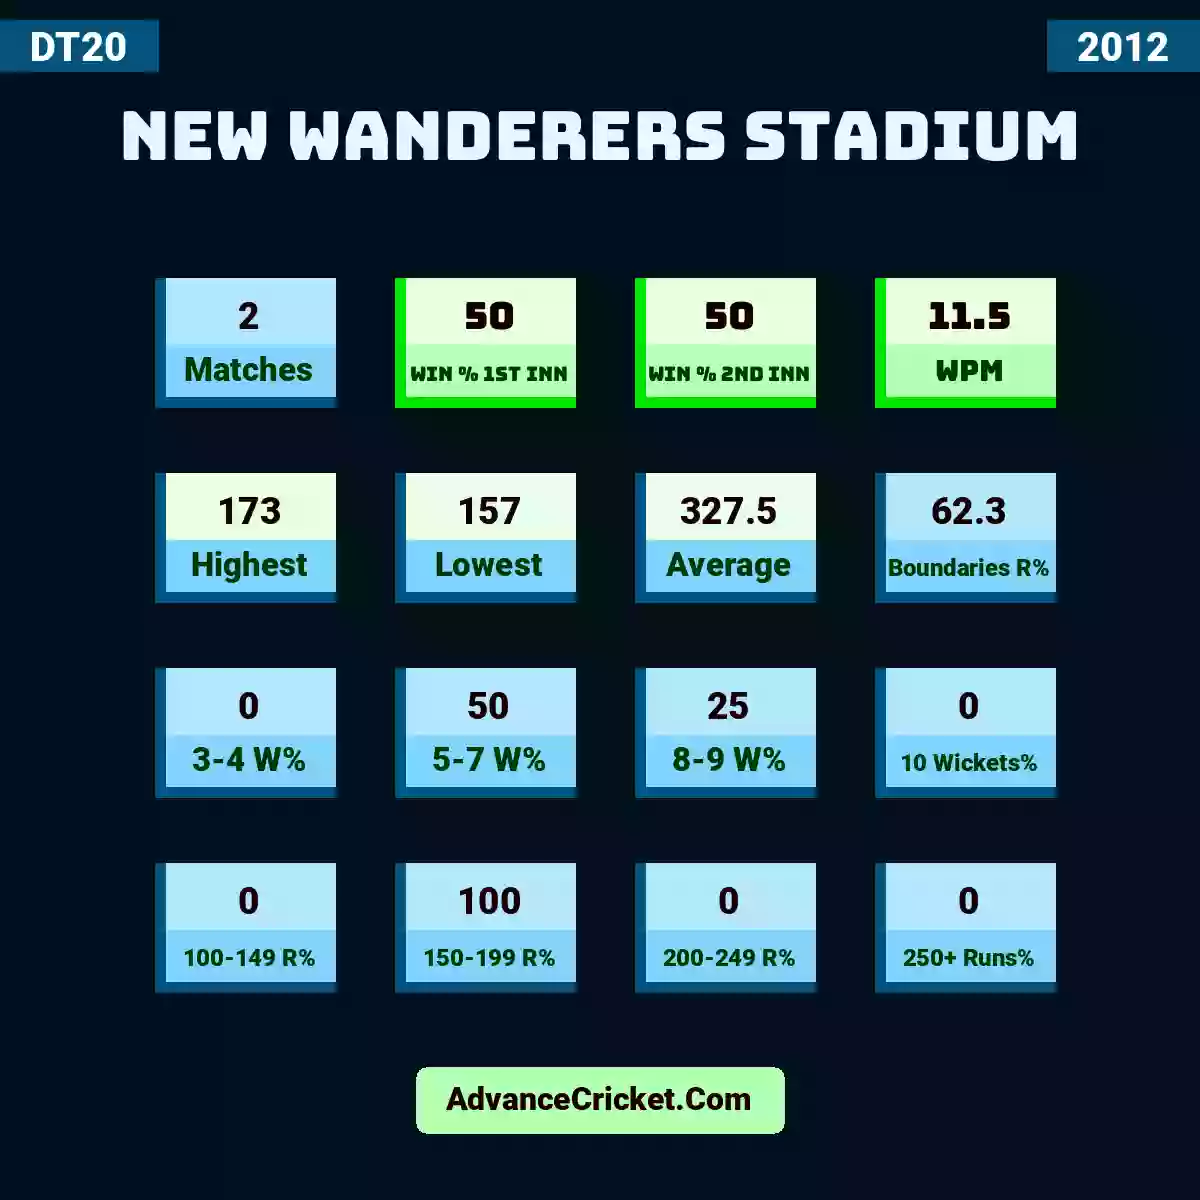 Image showing New Wanderers Stadium with Matches: 2, Win % 1st Inn: 50, Win % 2nd Inn: 50, WPM: 11.5, Highest: 173, Lowest: 157, Average: 327.5, Boundaries R%: 62.3, 3-4 W%: 0, 5-7 W%: 50, 8-9 W%: 25, 10 Wickets%: 0, 100-149 R%: 0, 150-199 R%: 100, 200-249 R%: 0, 250+ Runs%: 0.